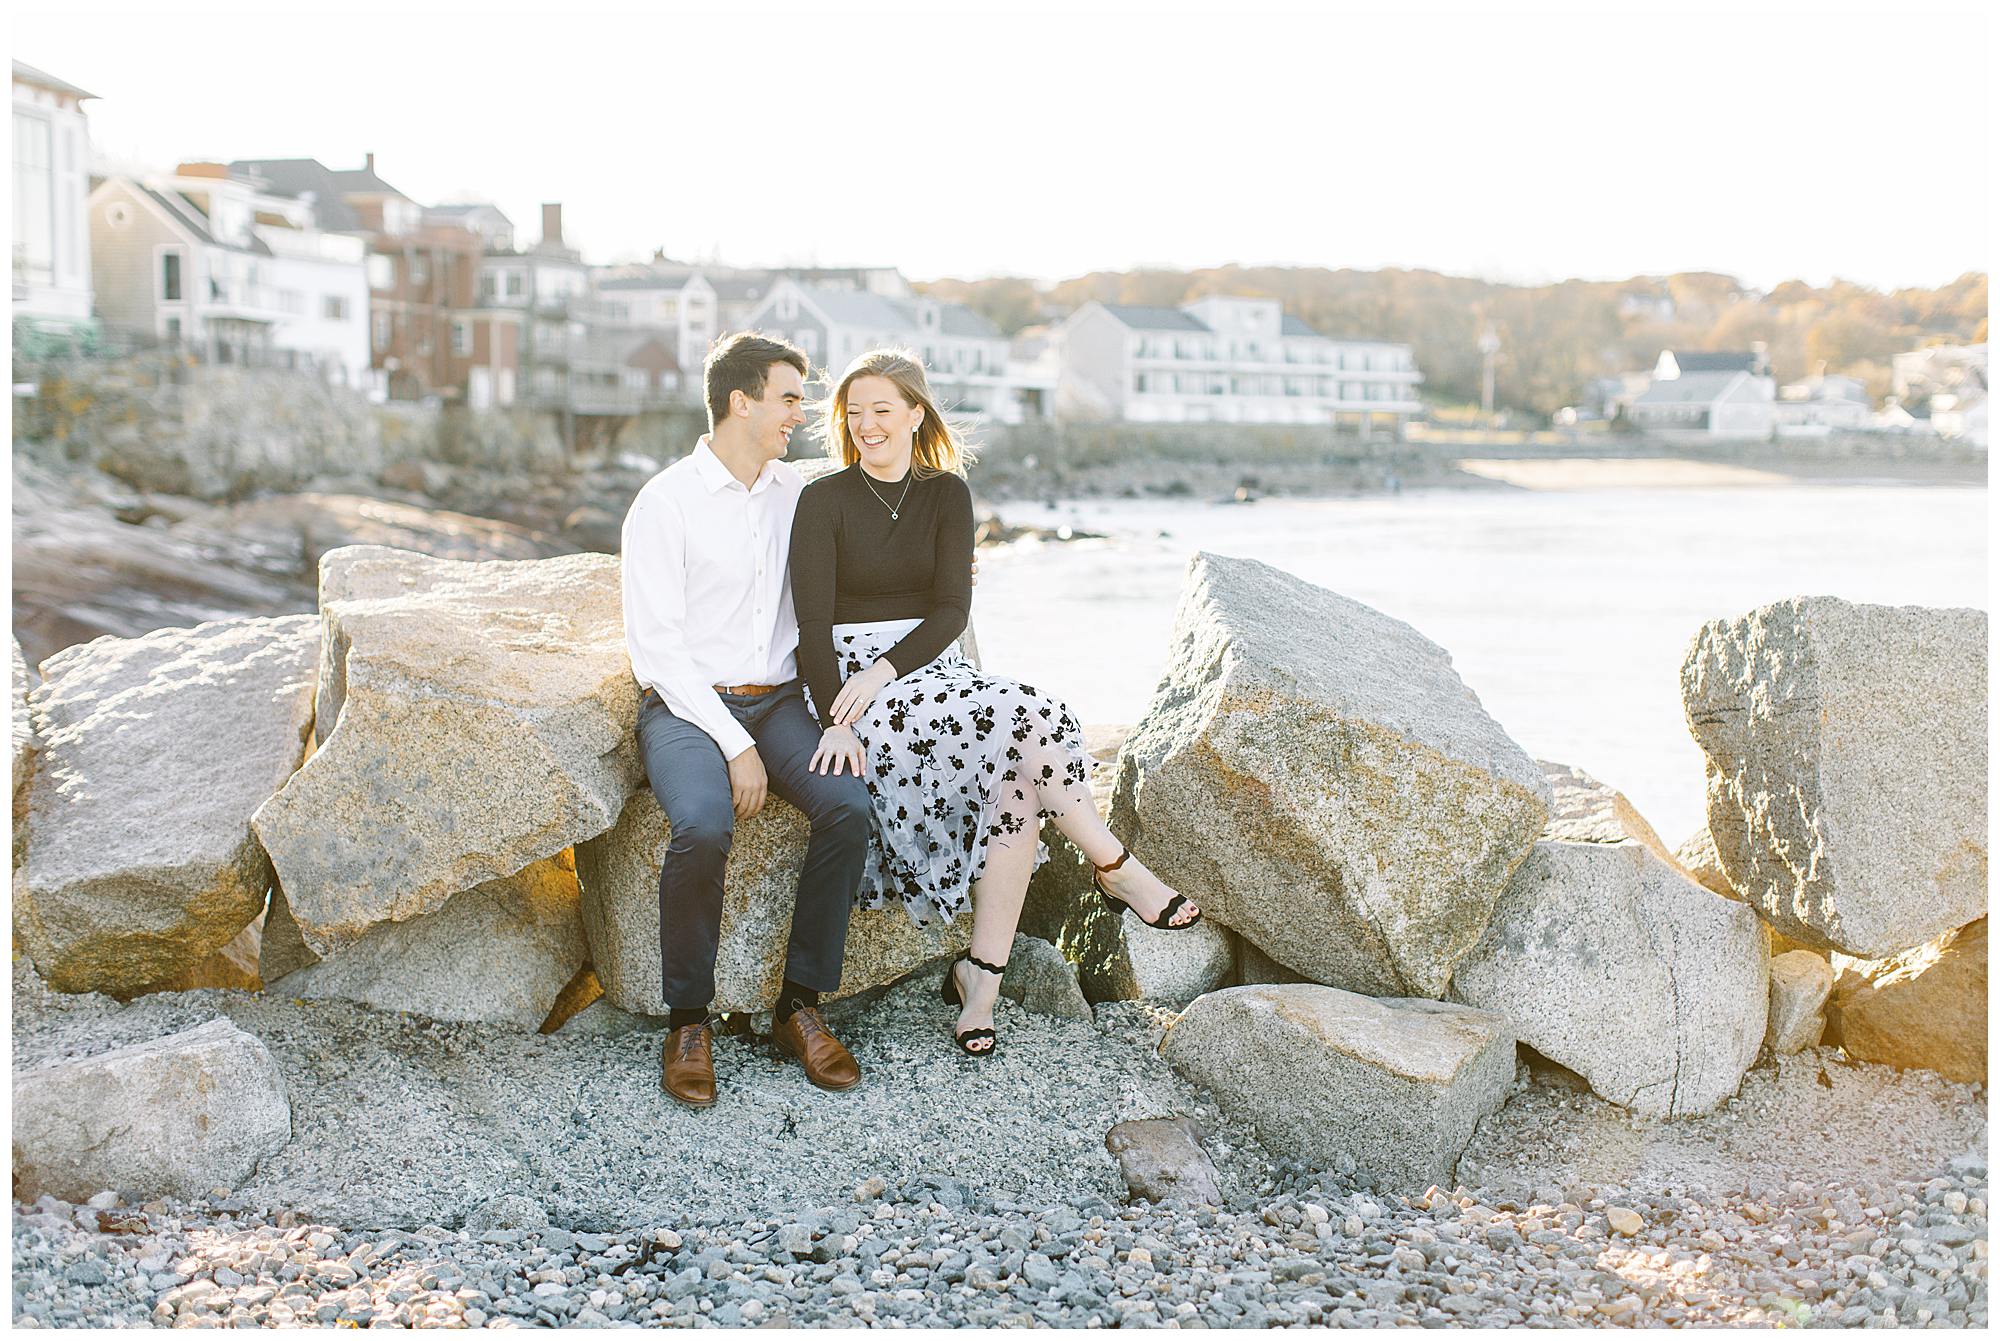 A Breezy Fall Engagement in Rockport